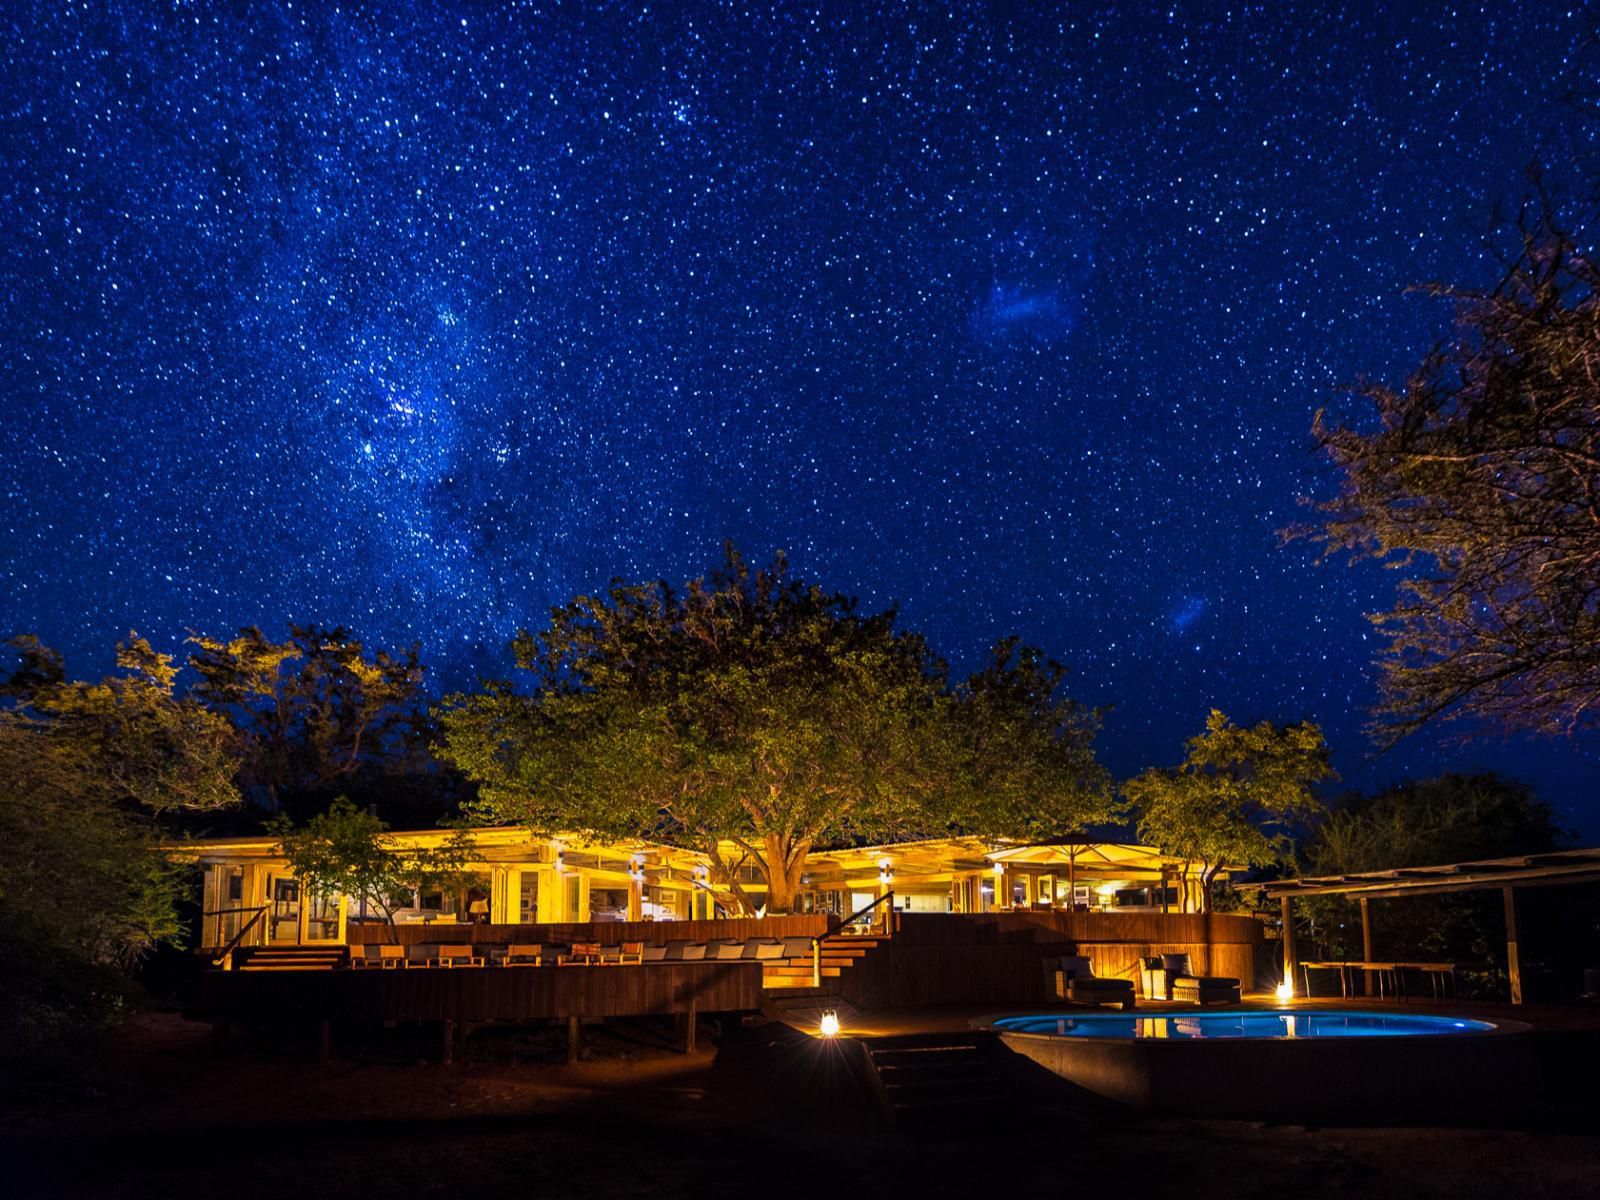 Tintswalo Lapalala Waterberg Limpopo Province South Africa Colorful, Astronomy, Nature, Night Sky